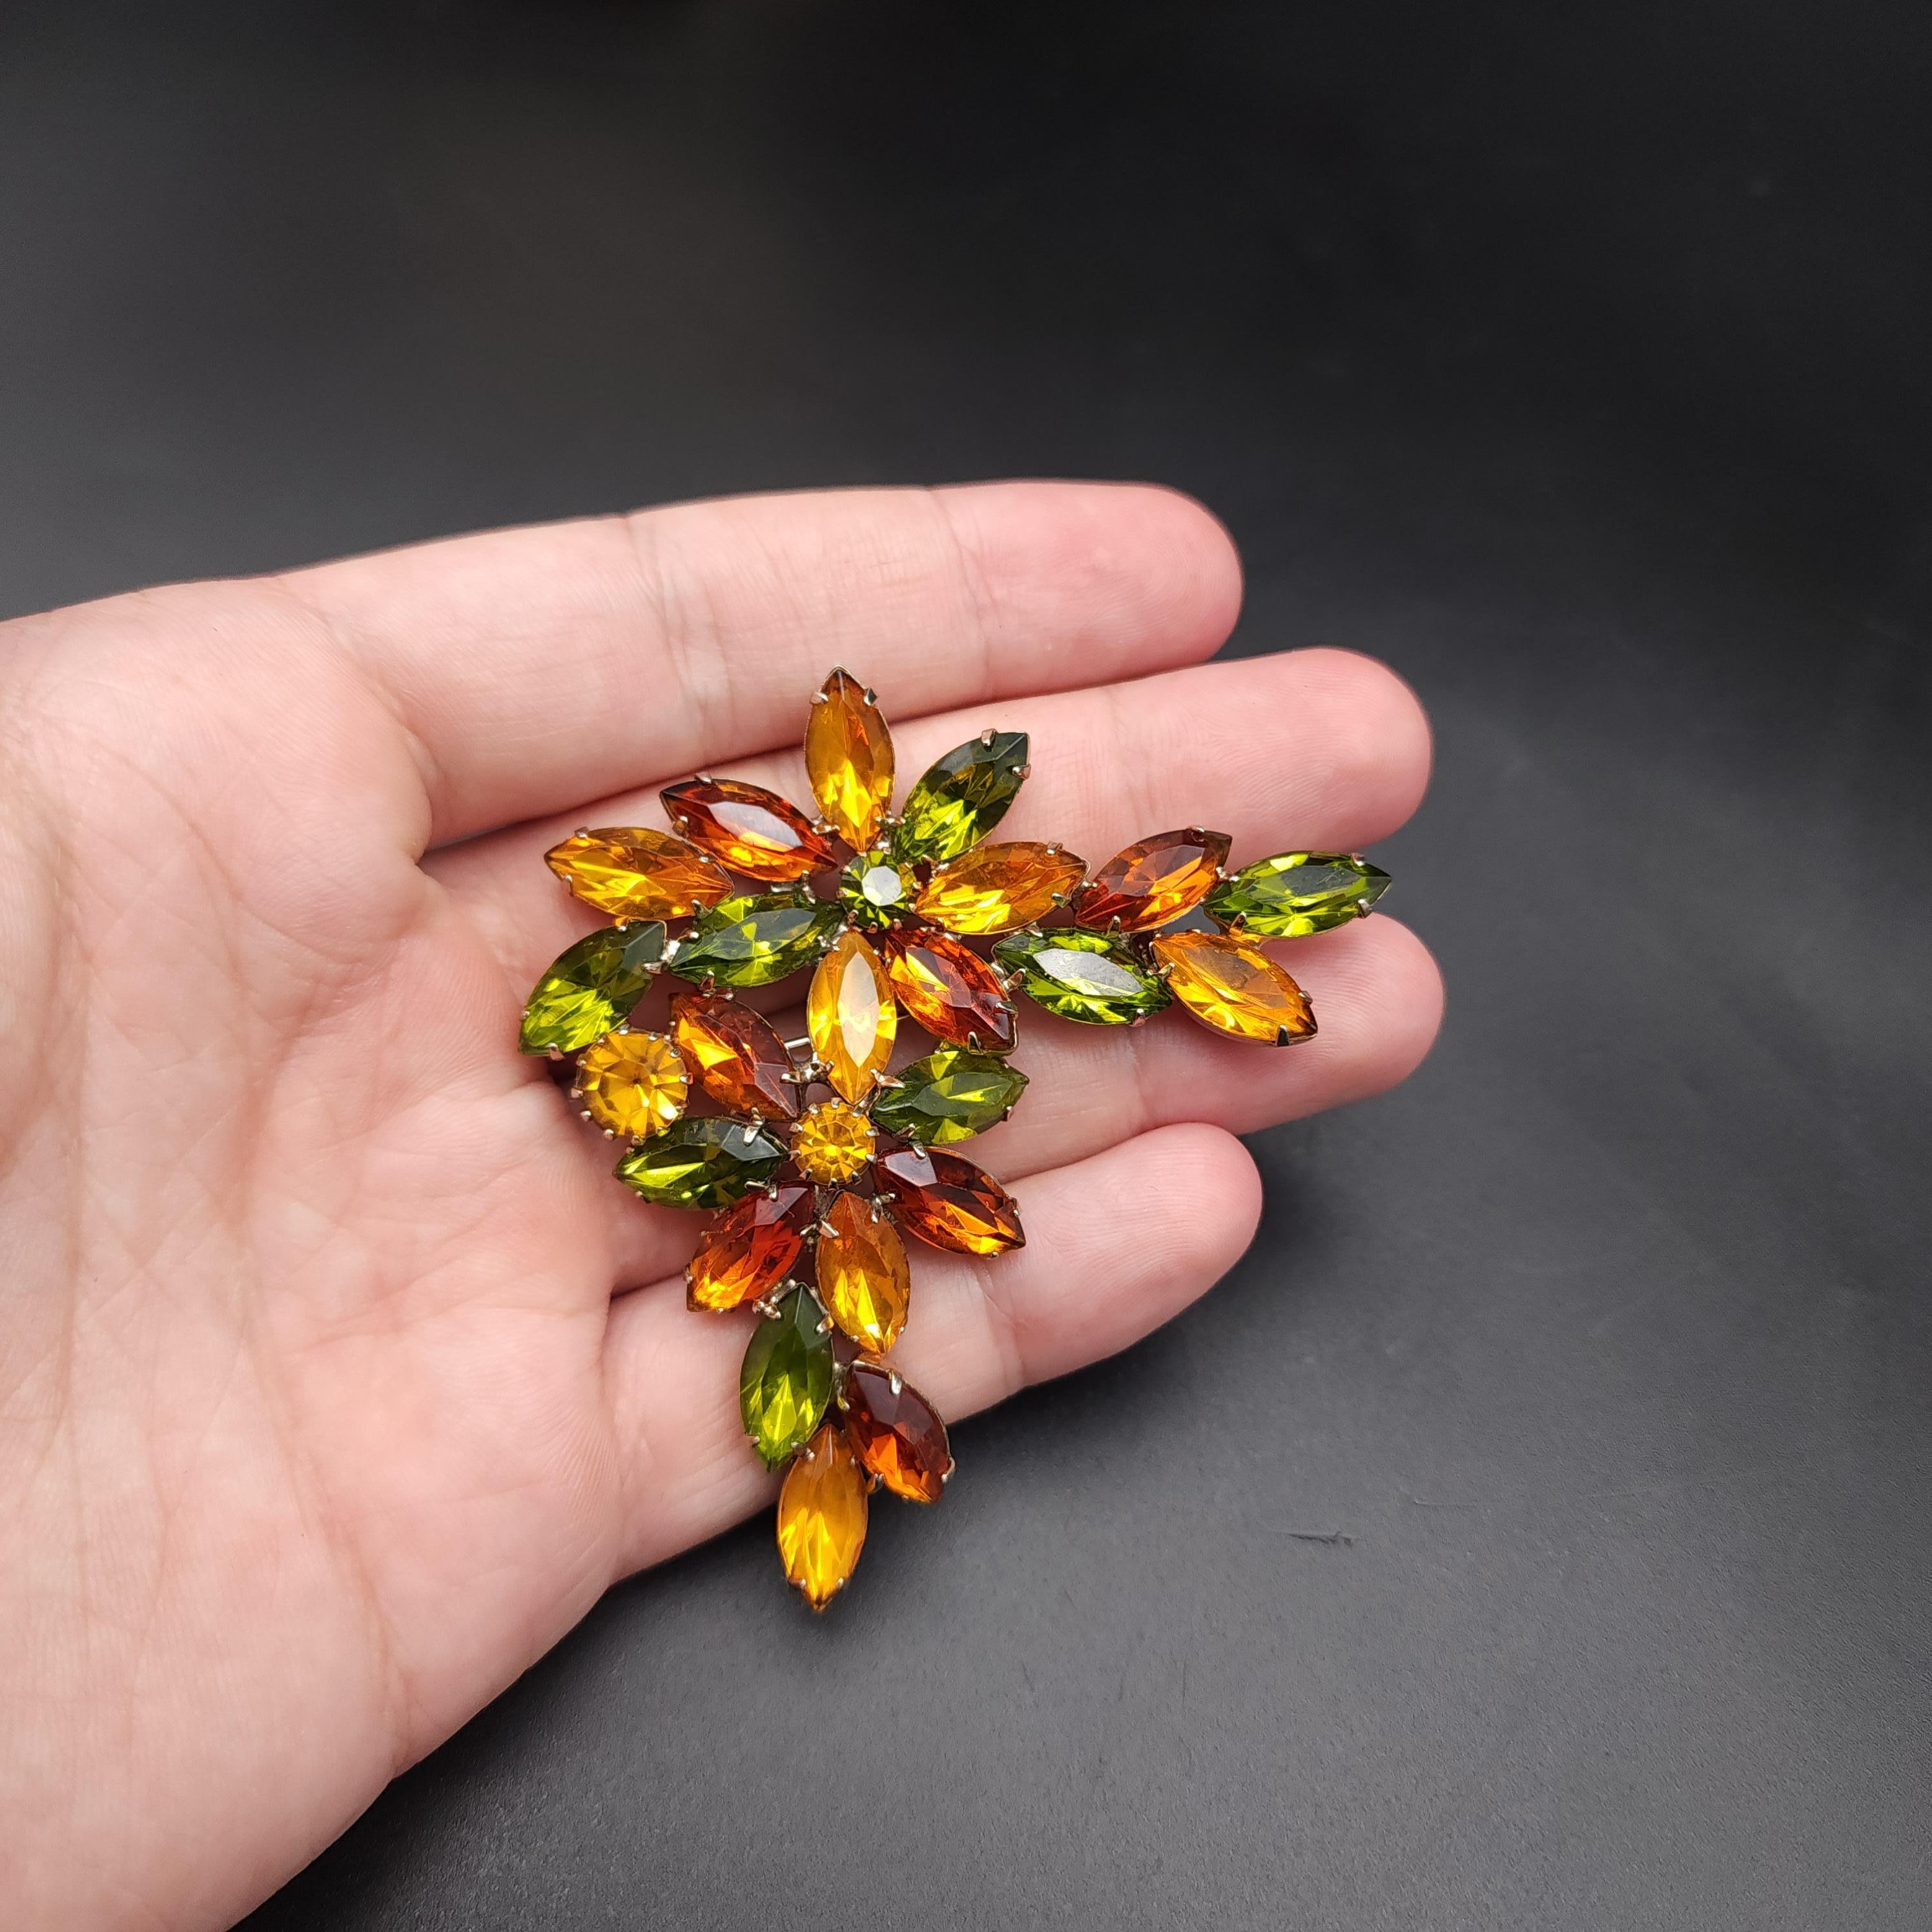 Vintage Floral Cluster Crystal Brooch Pin, Peridot and Citrine Crystal, Retro In Excellent Condition For Sale In Milford, DE